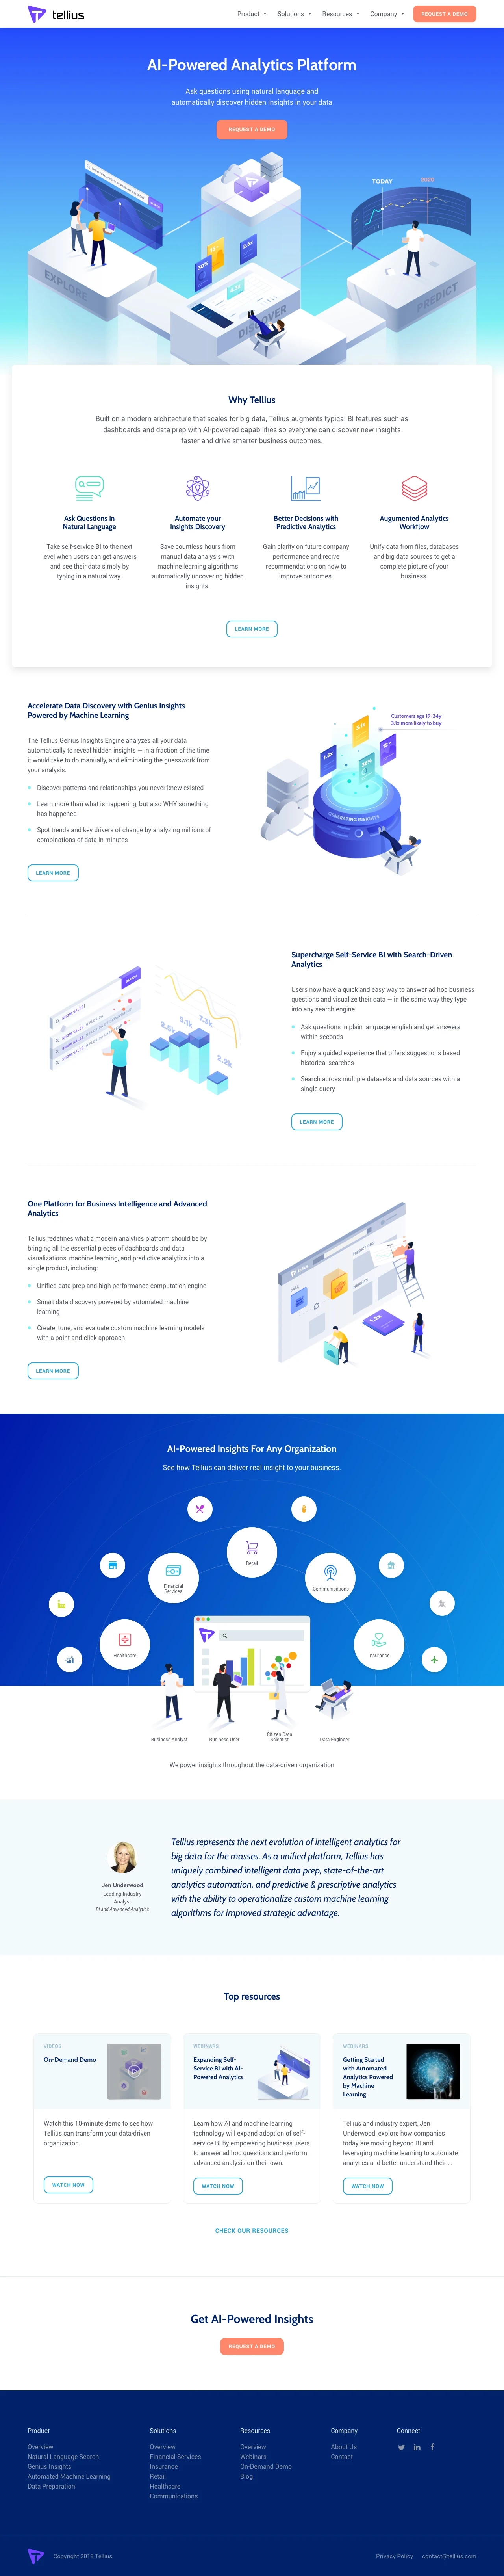 Tellius Landing Page Example: Tellius is a business intelligence and analytics platform powered by machine learning that combines natural language search, automated discovery of insights, predictive analytics, interactive dashboards, and big data architecture